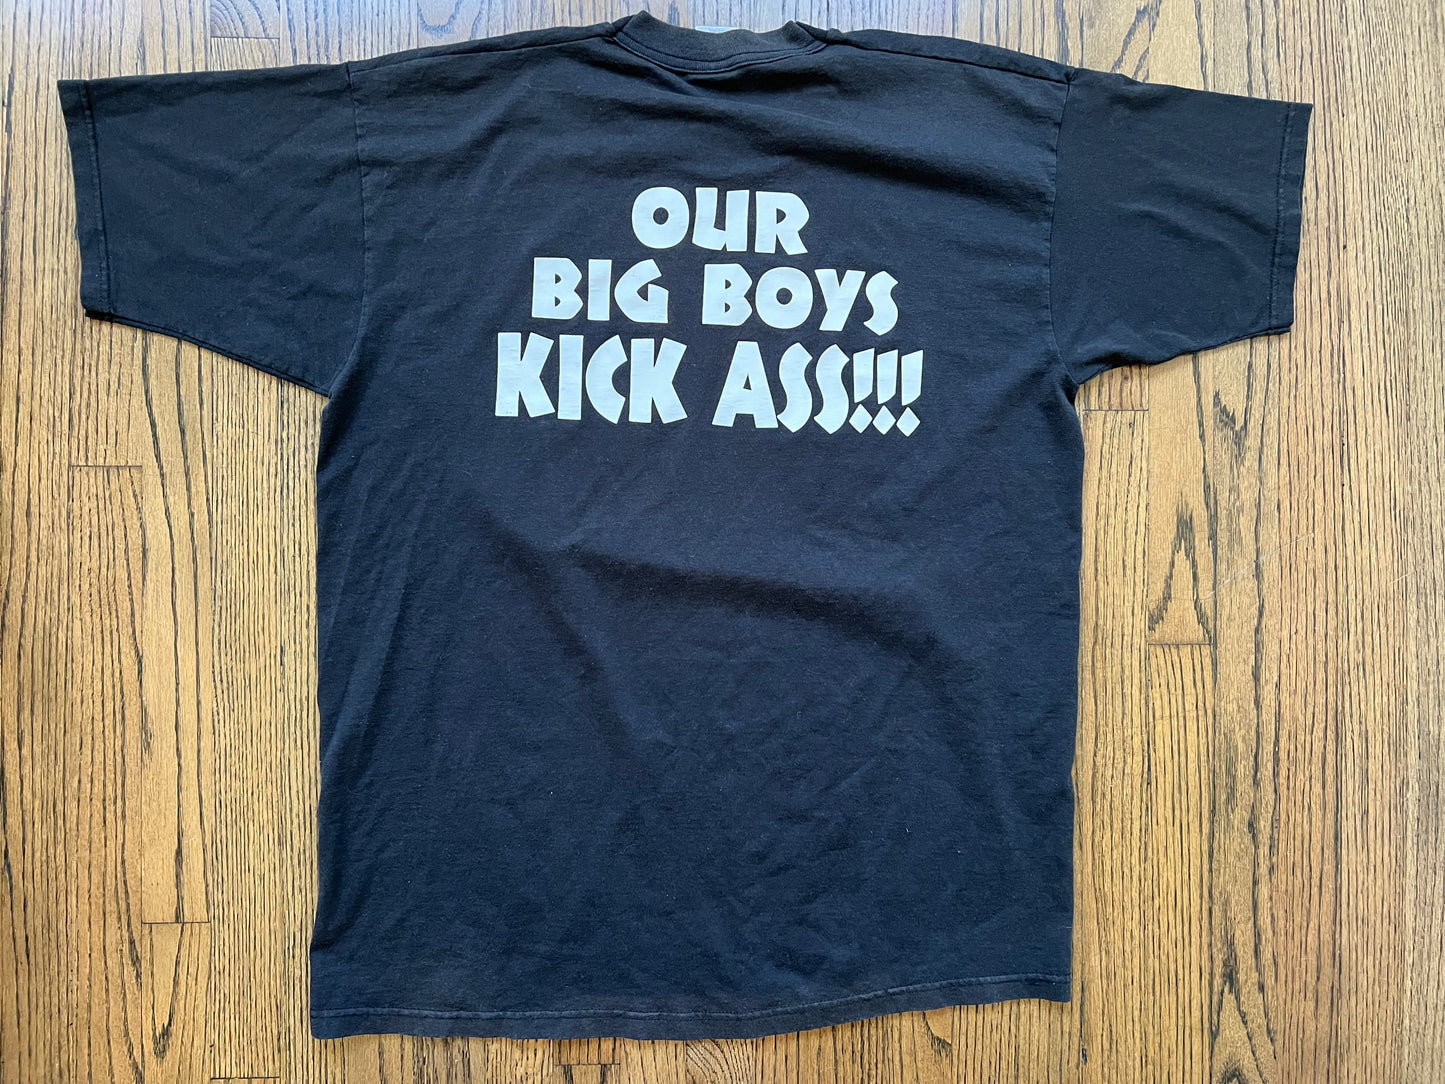 1995 ECW “Extreme Wrestling” / “Our Big Boys Kick Ass!!!” two sided shirt